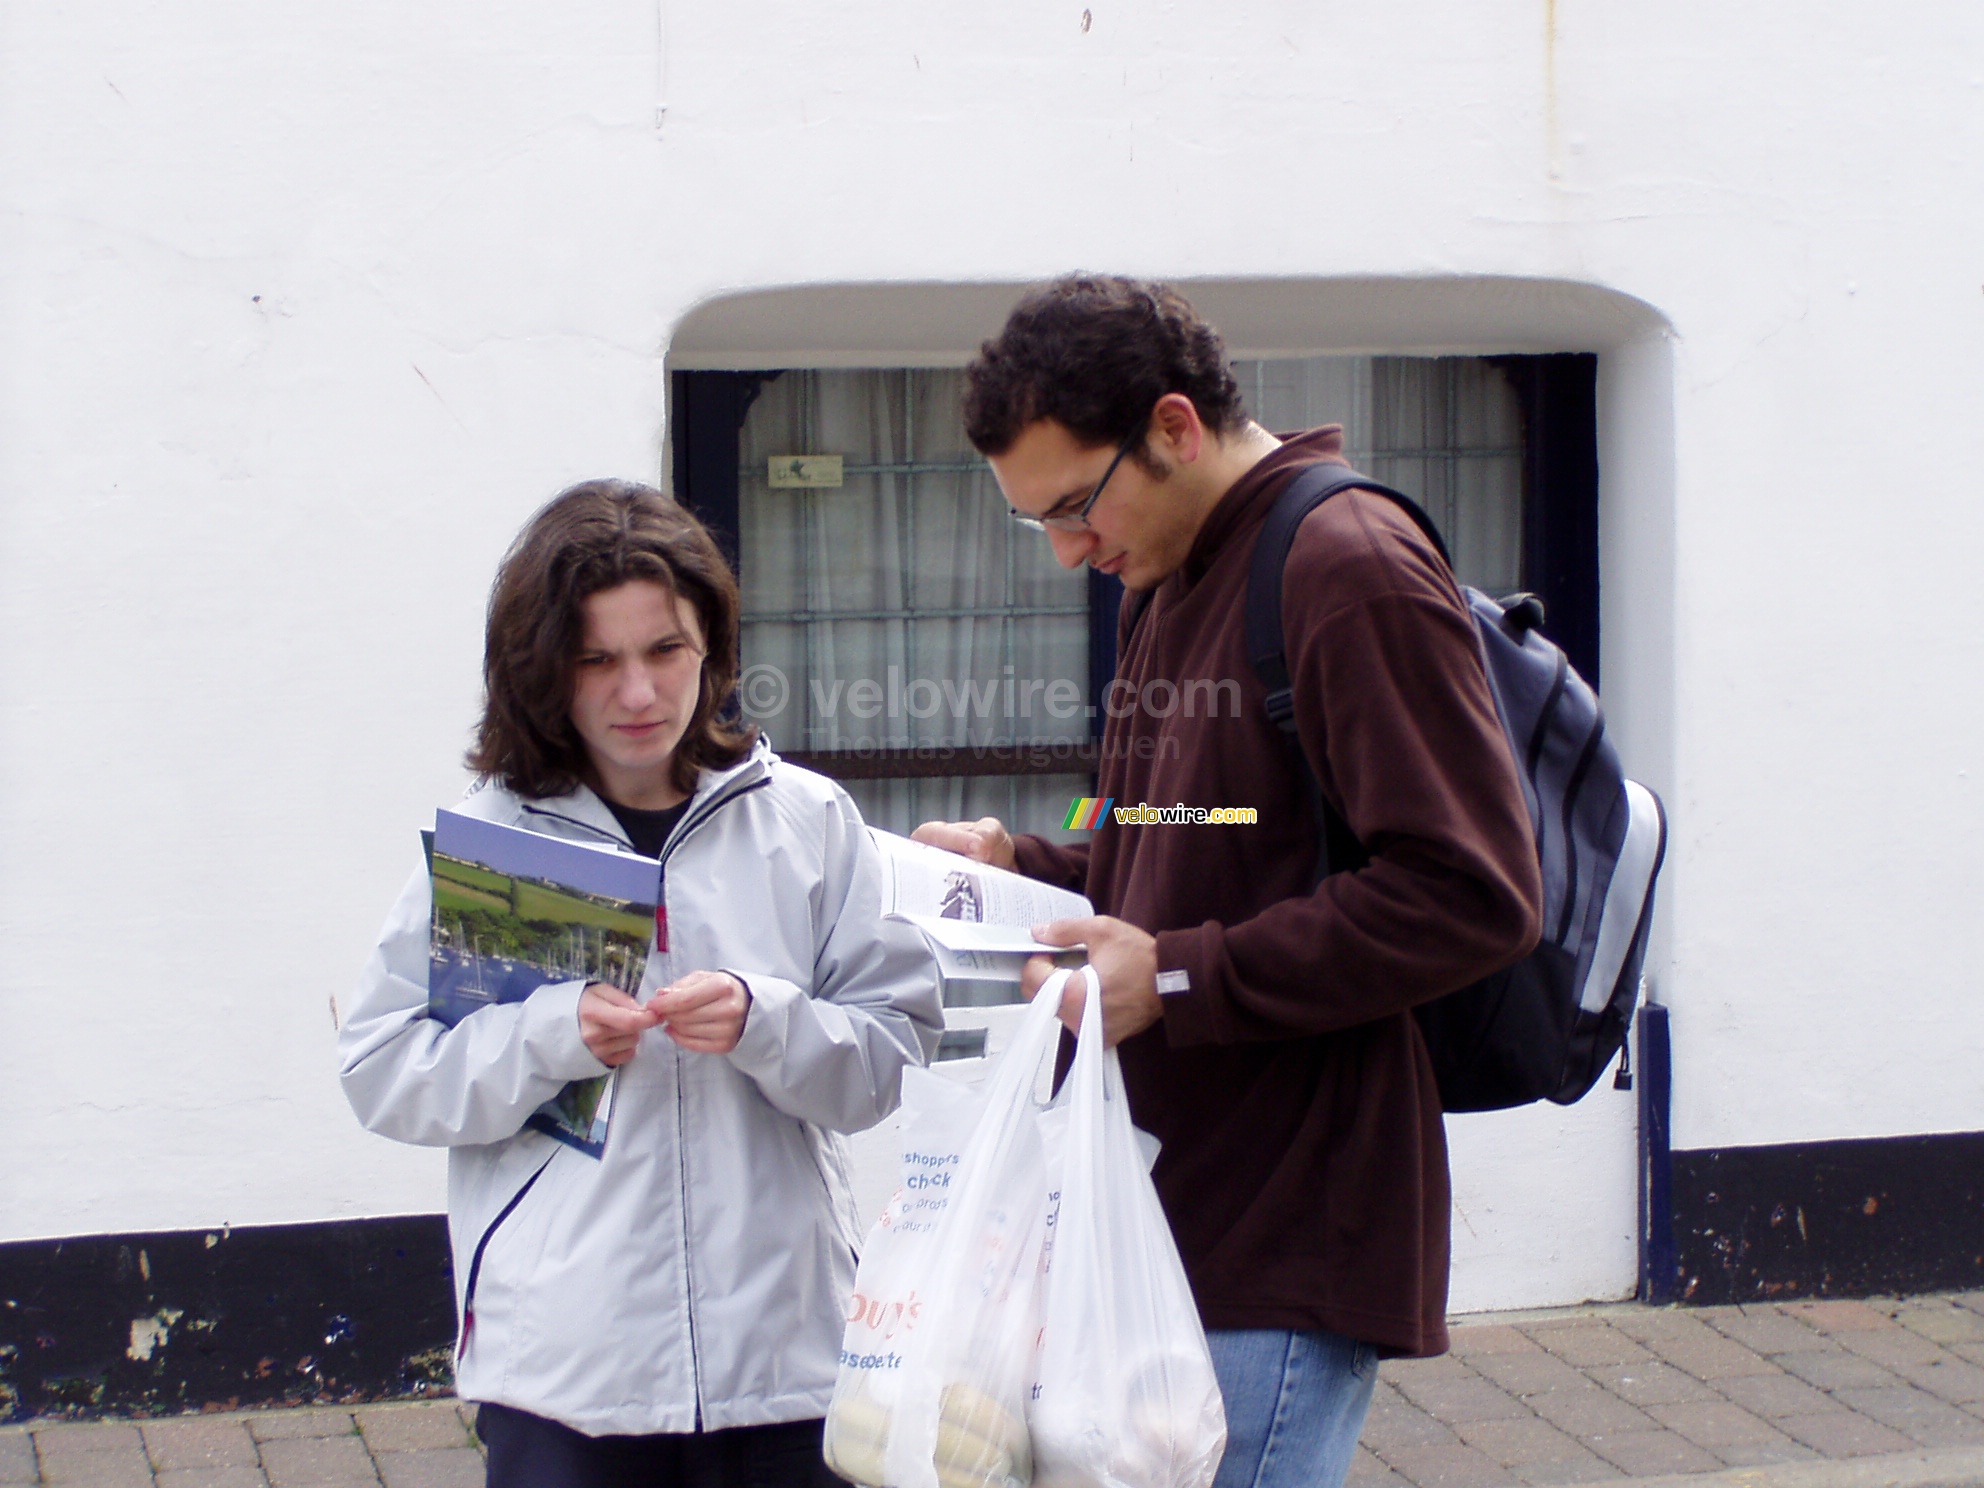 Marie & Cédric as tourists in Salcombe